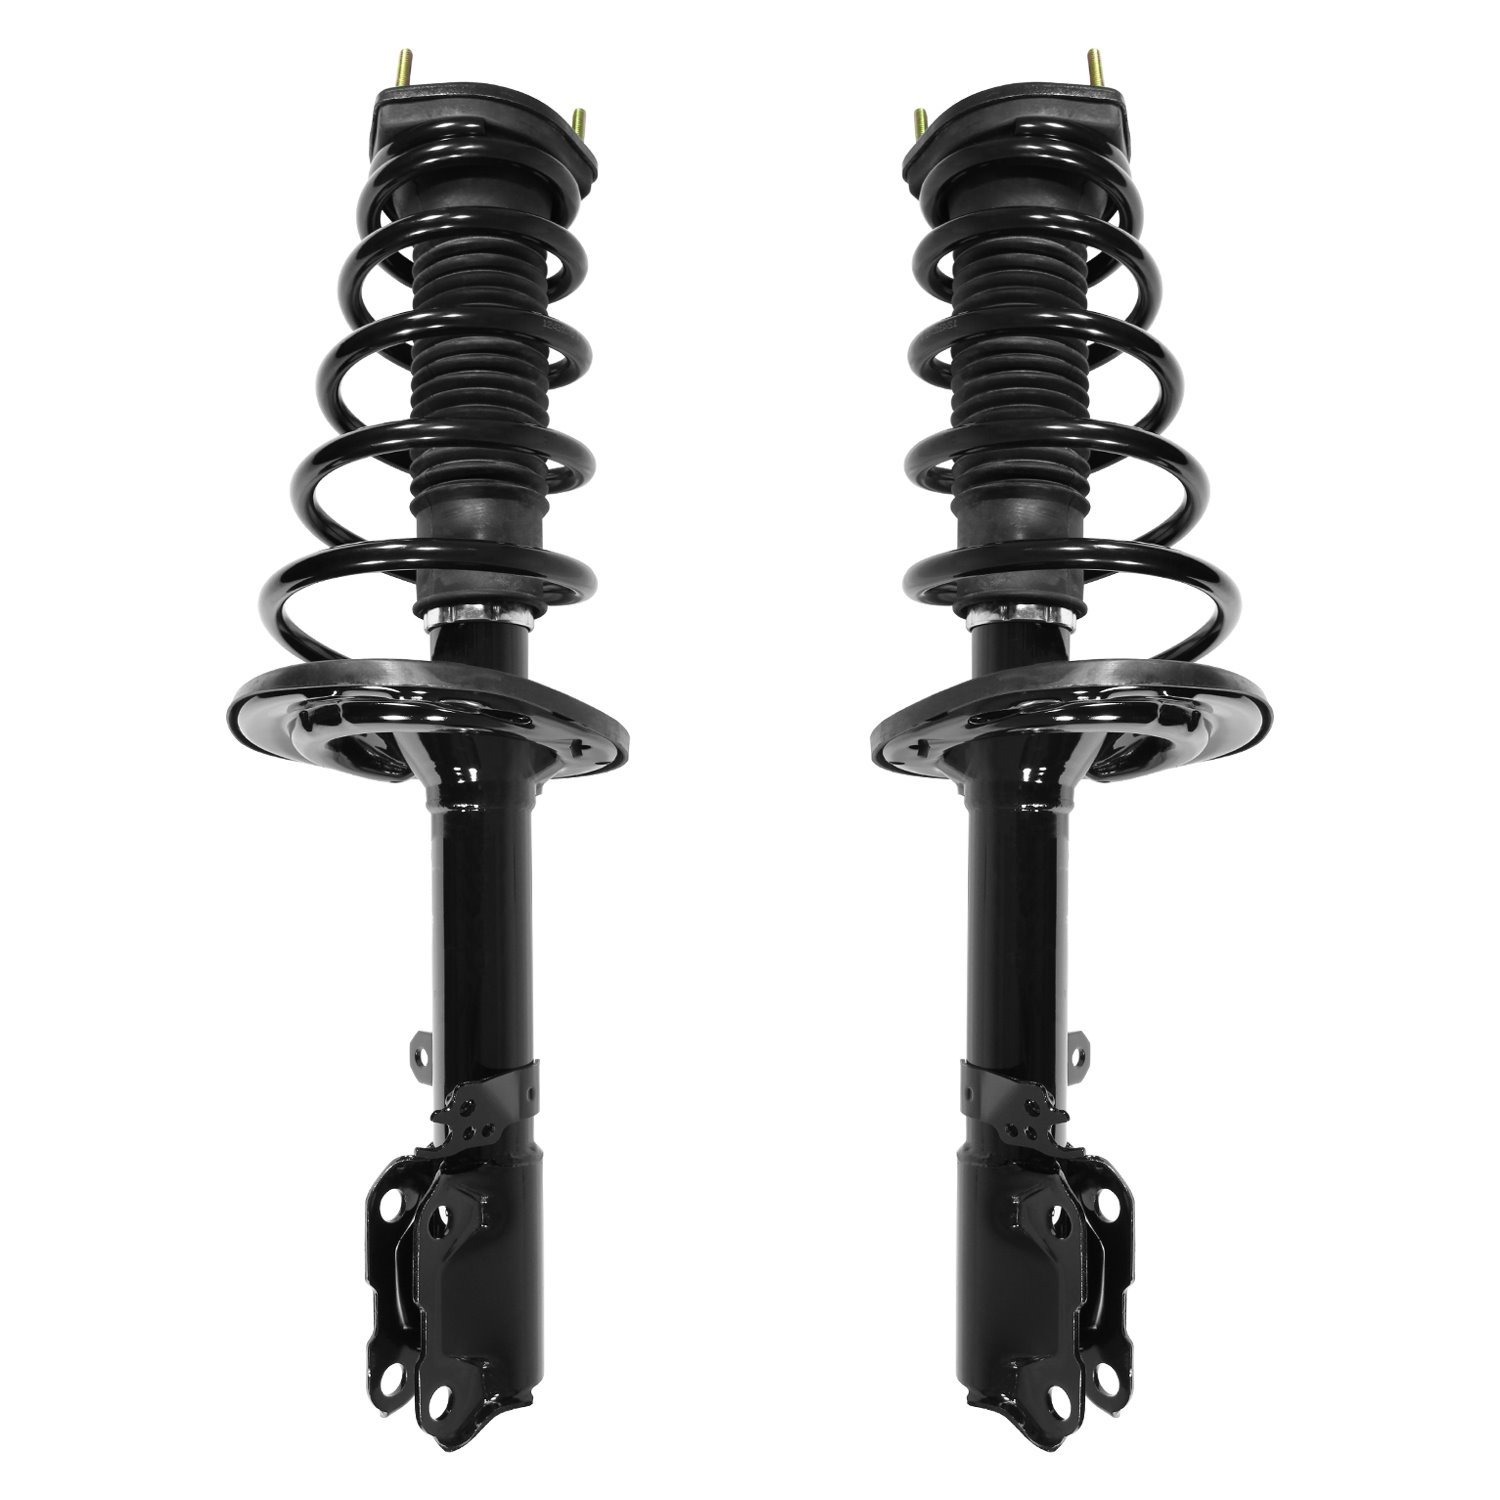 2-15361-15362-001 Suspension Strut & Coil Spring Assembly Set Fits Select Lexus ES350, Toyota Avalon, Toyota Camry